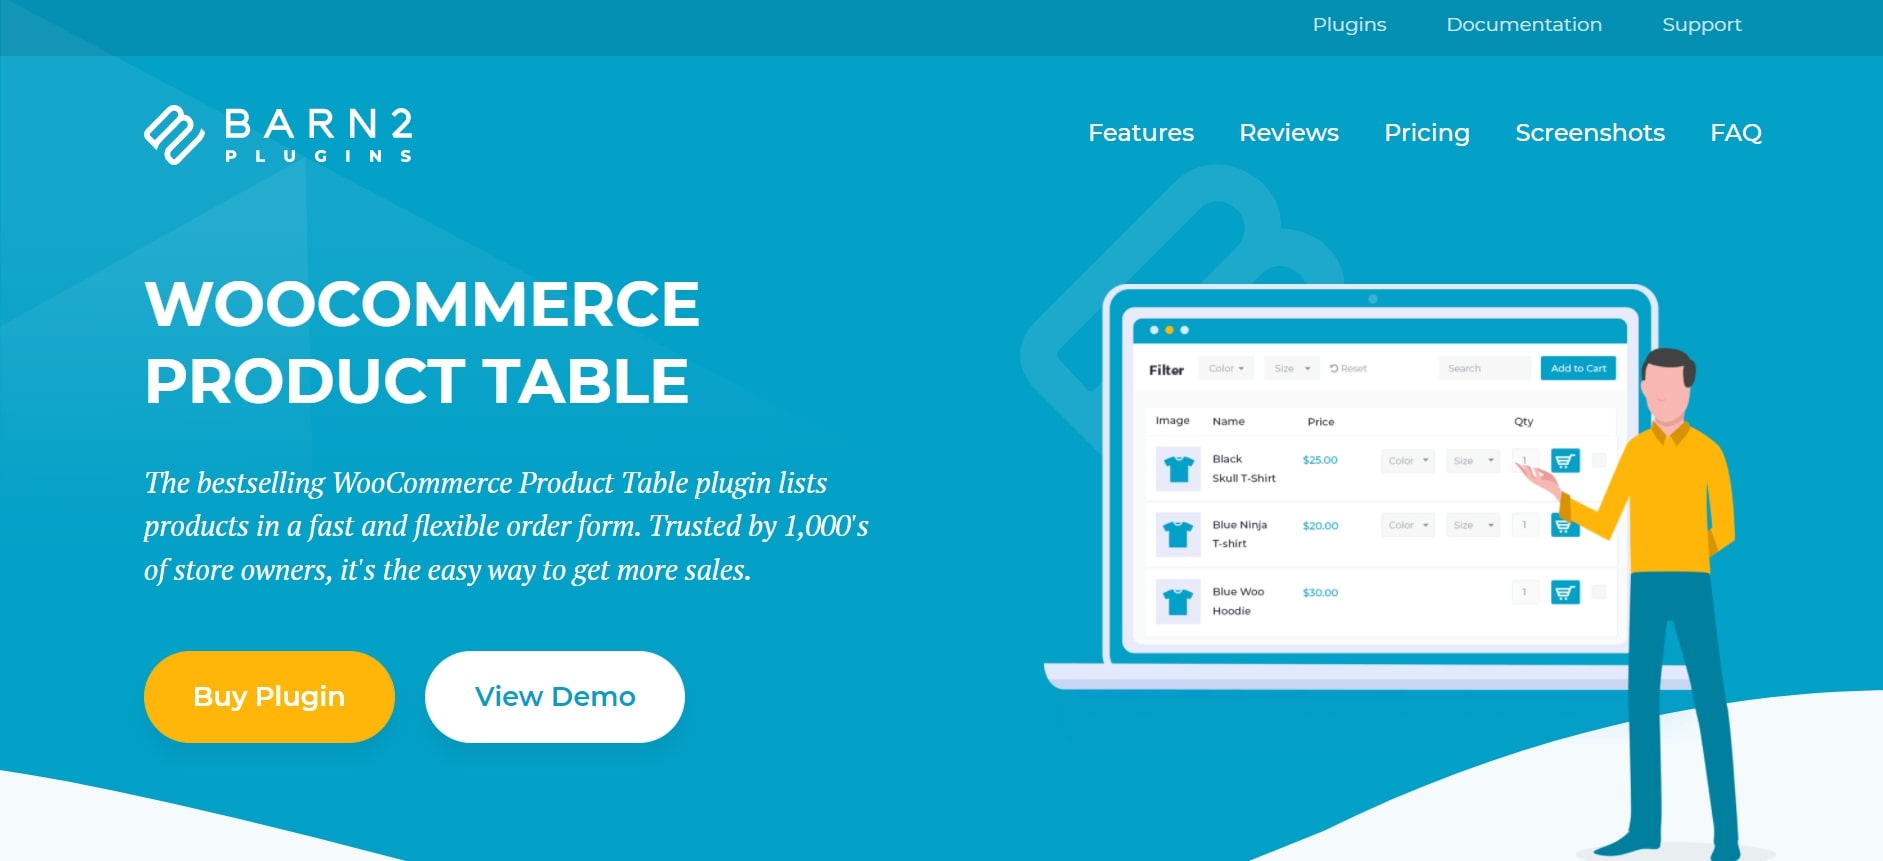 WooCommerce Product Table by Barn2